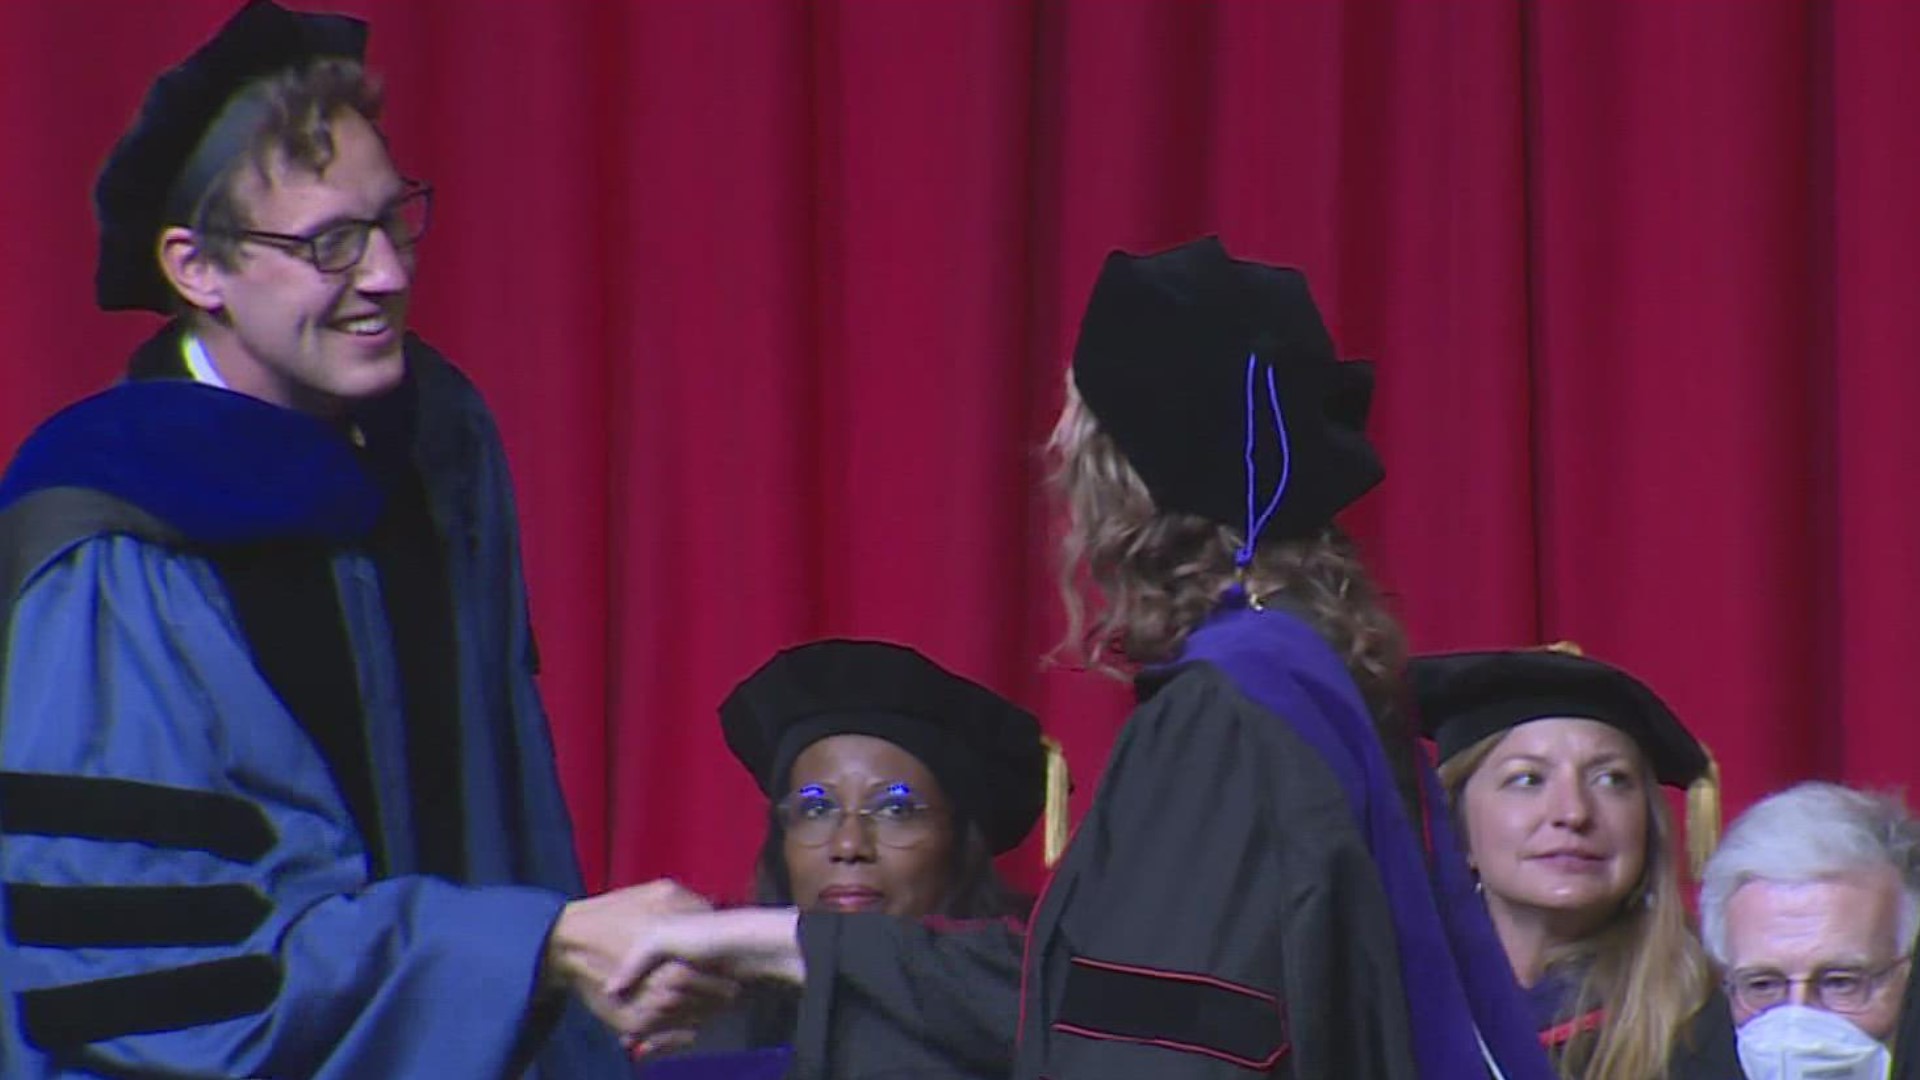 The University of Arkansas welcomed family and friends to the first in-person graduation ceremonies since 2019.